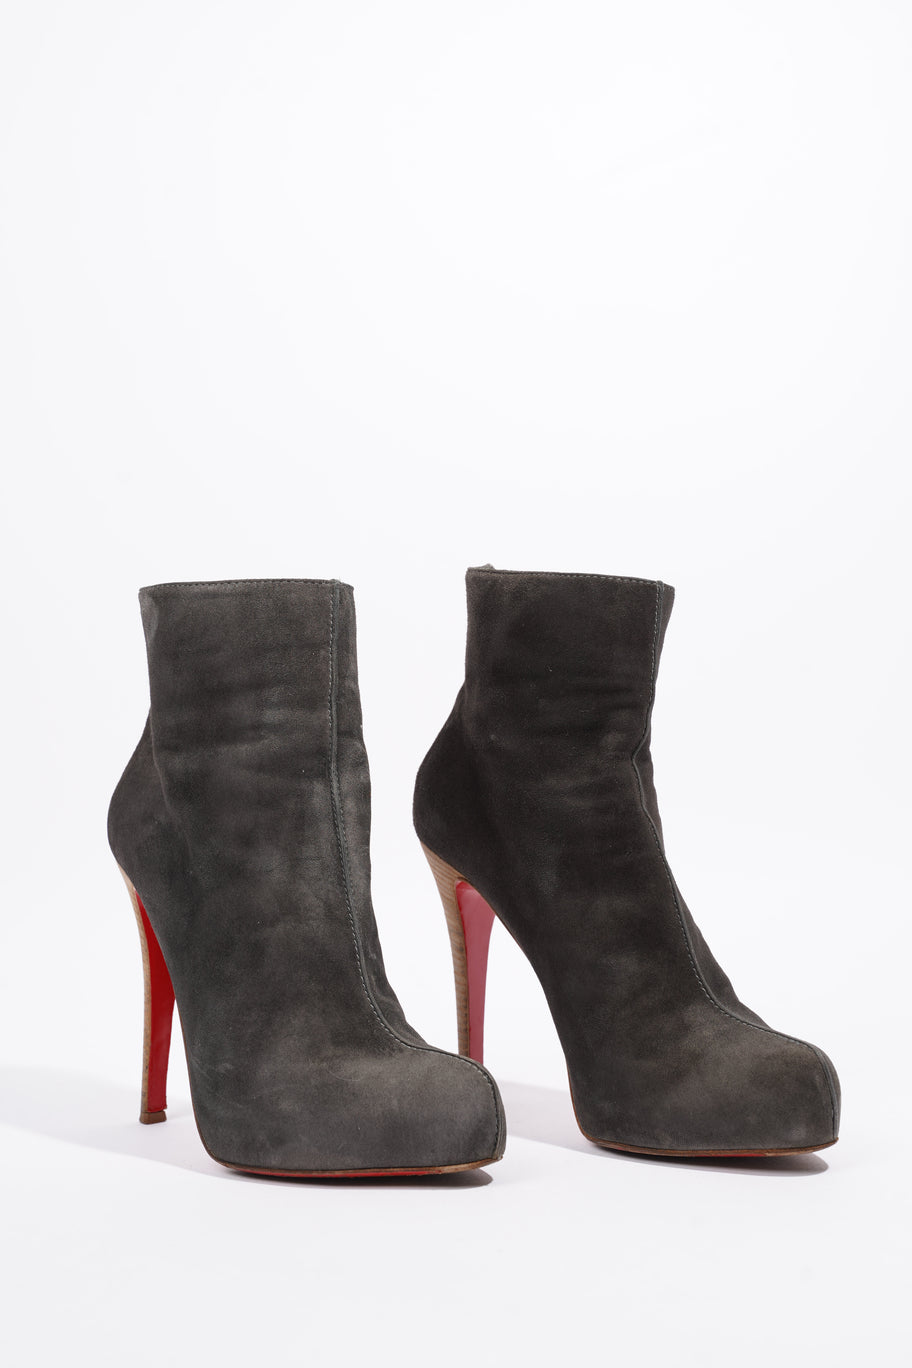 Ankle Boot Grey Suede EU 38 UK 5 Image 2